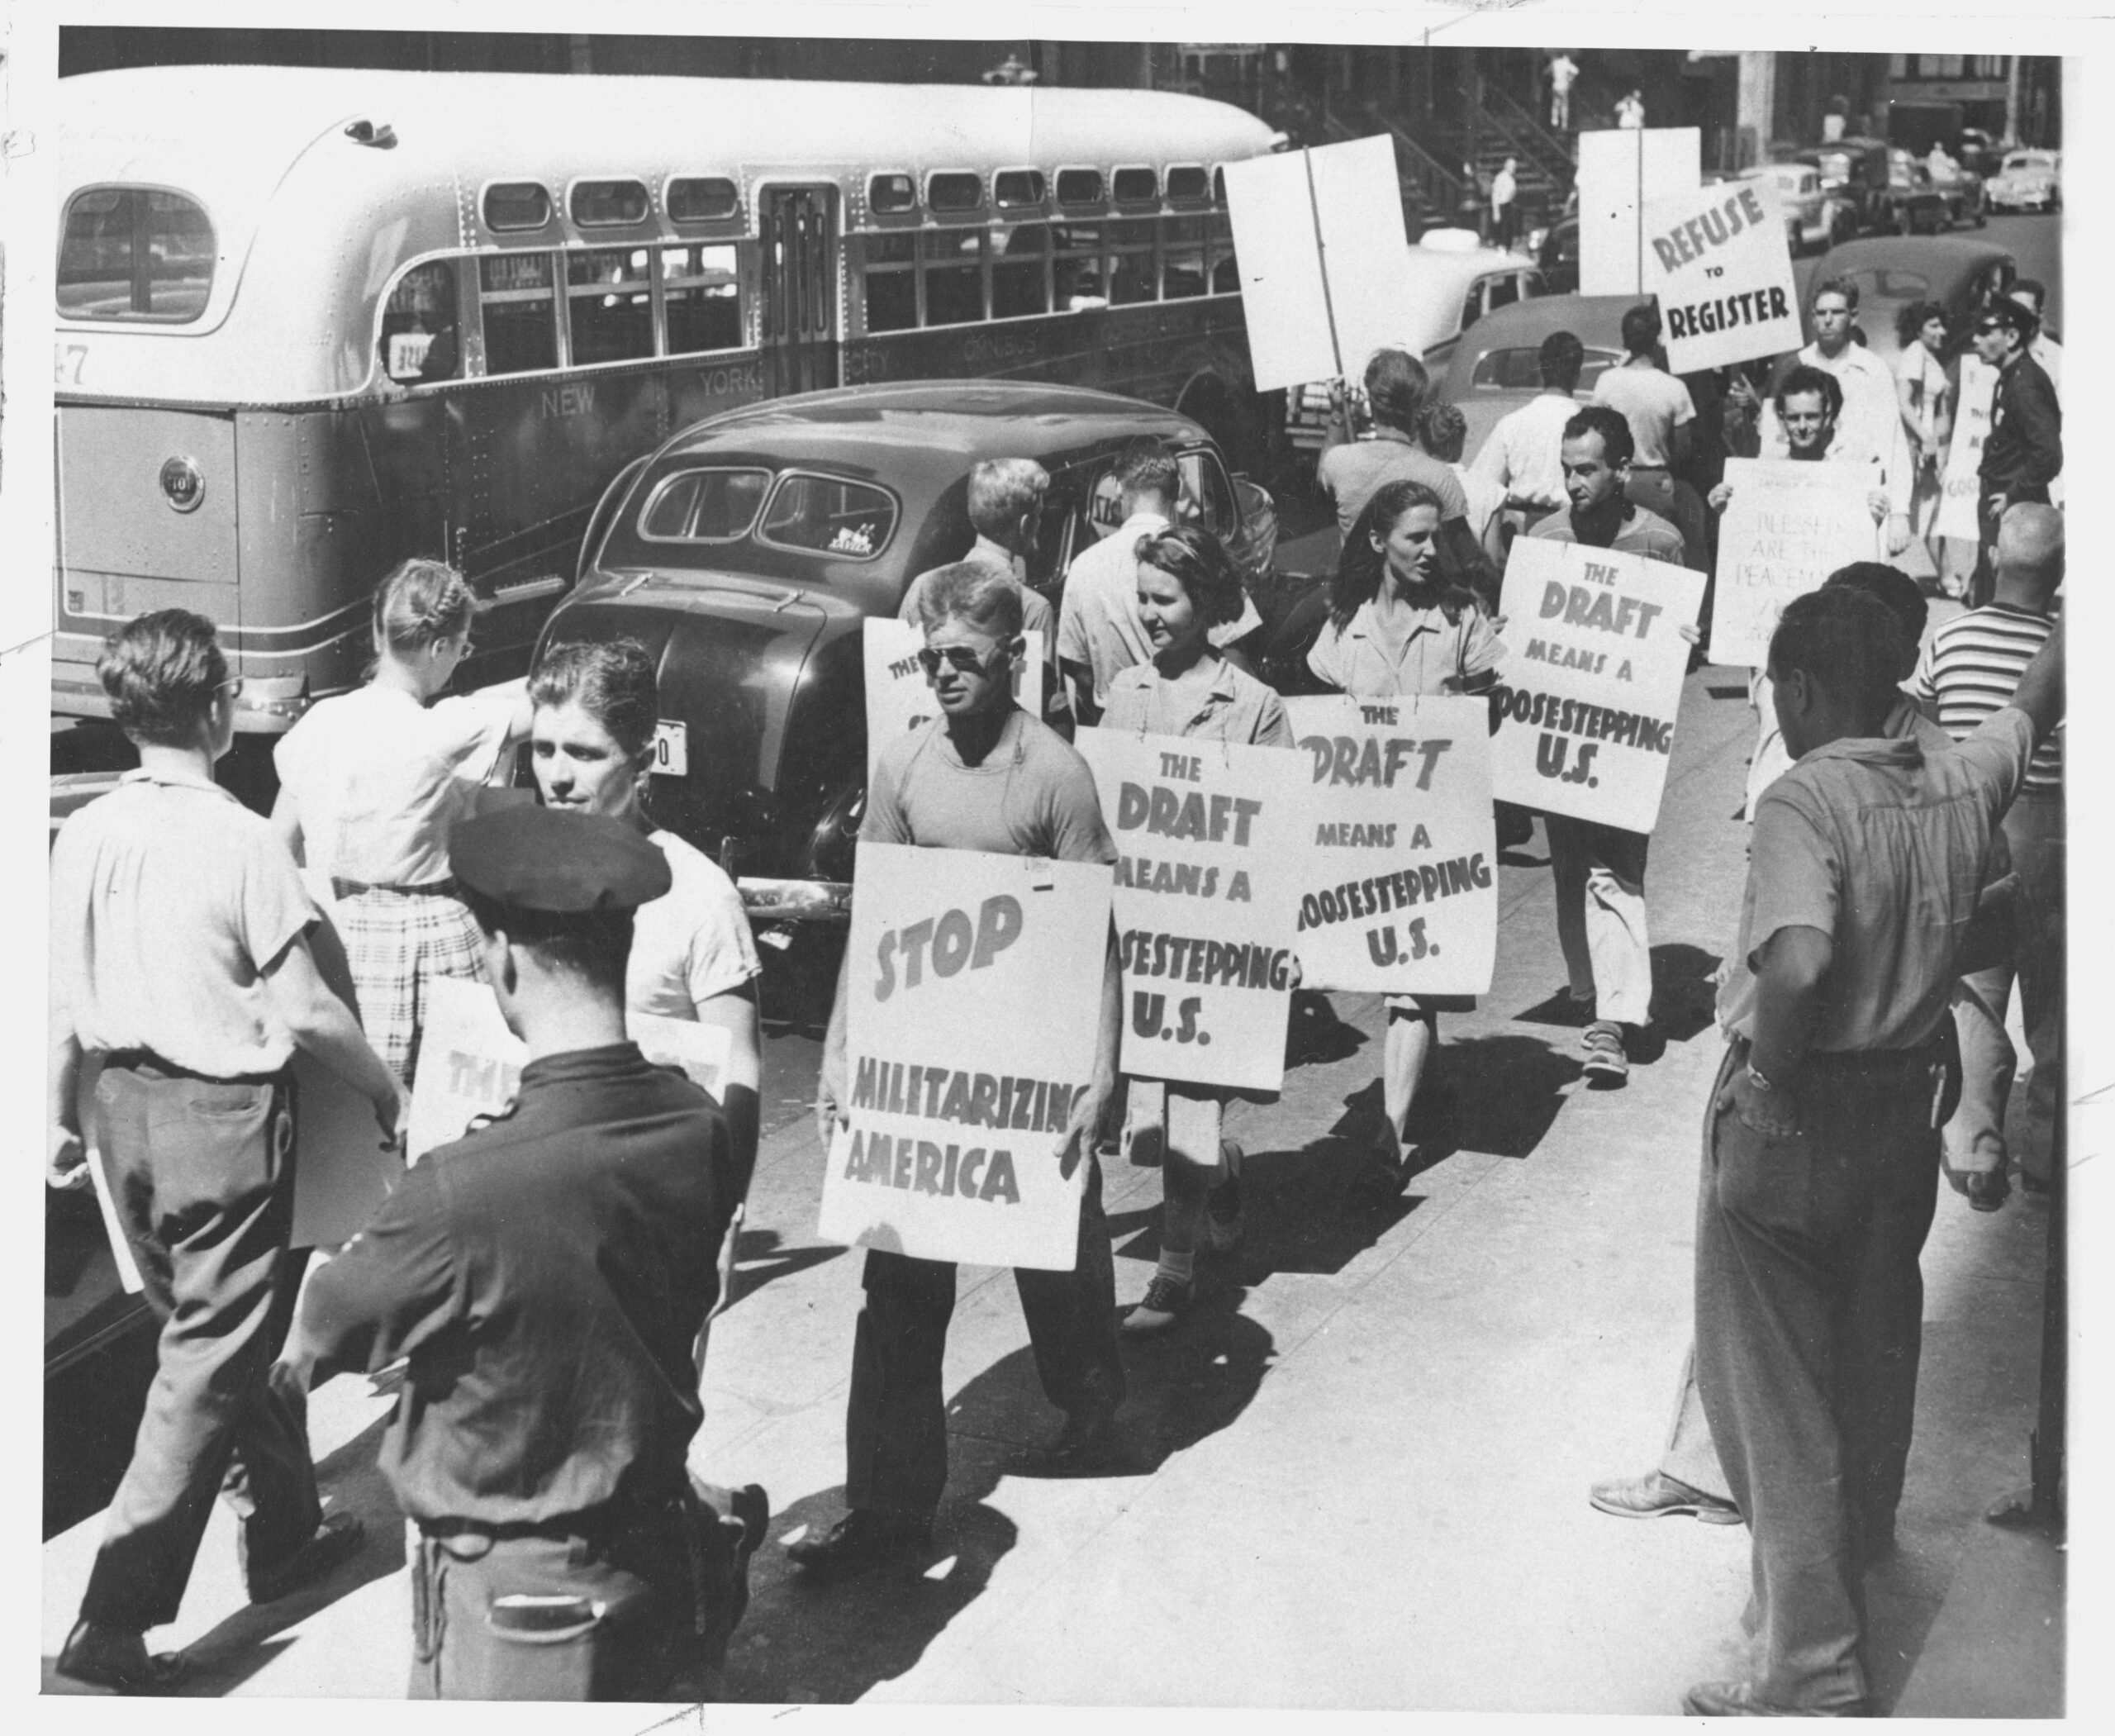 World War II-era anti-draft protest (FOR Archives)